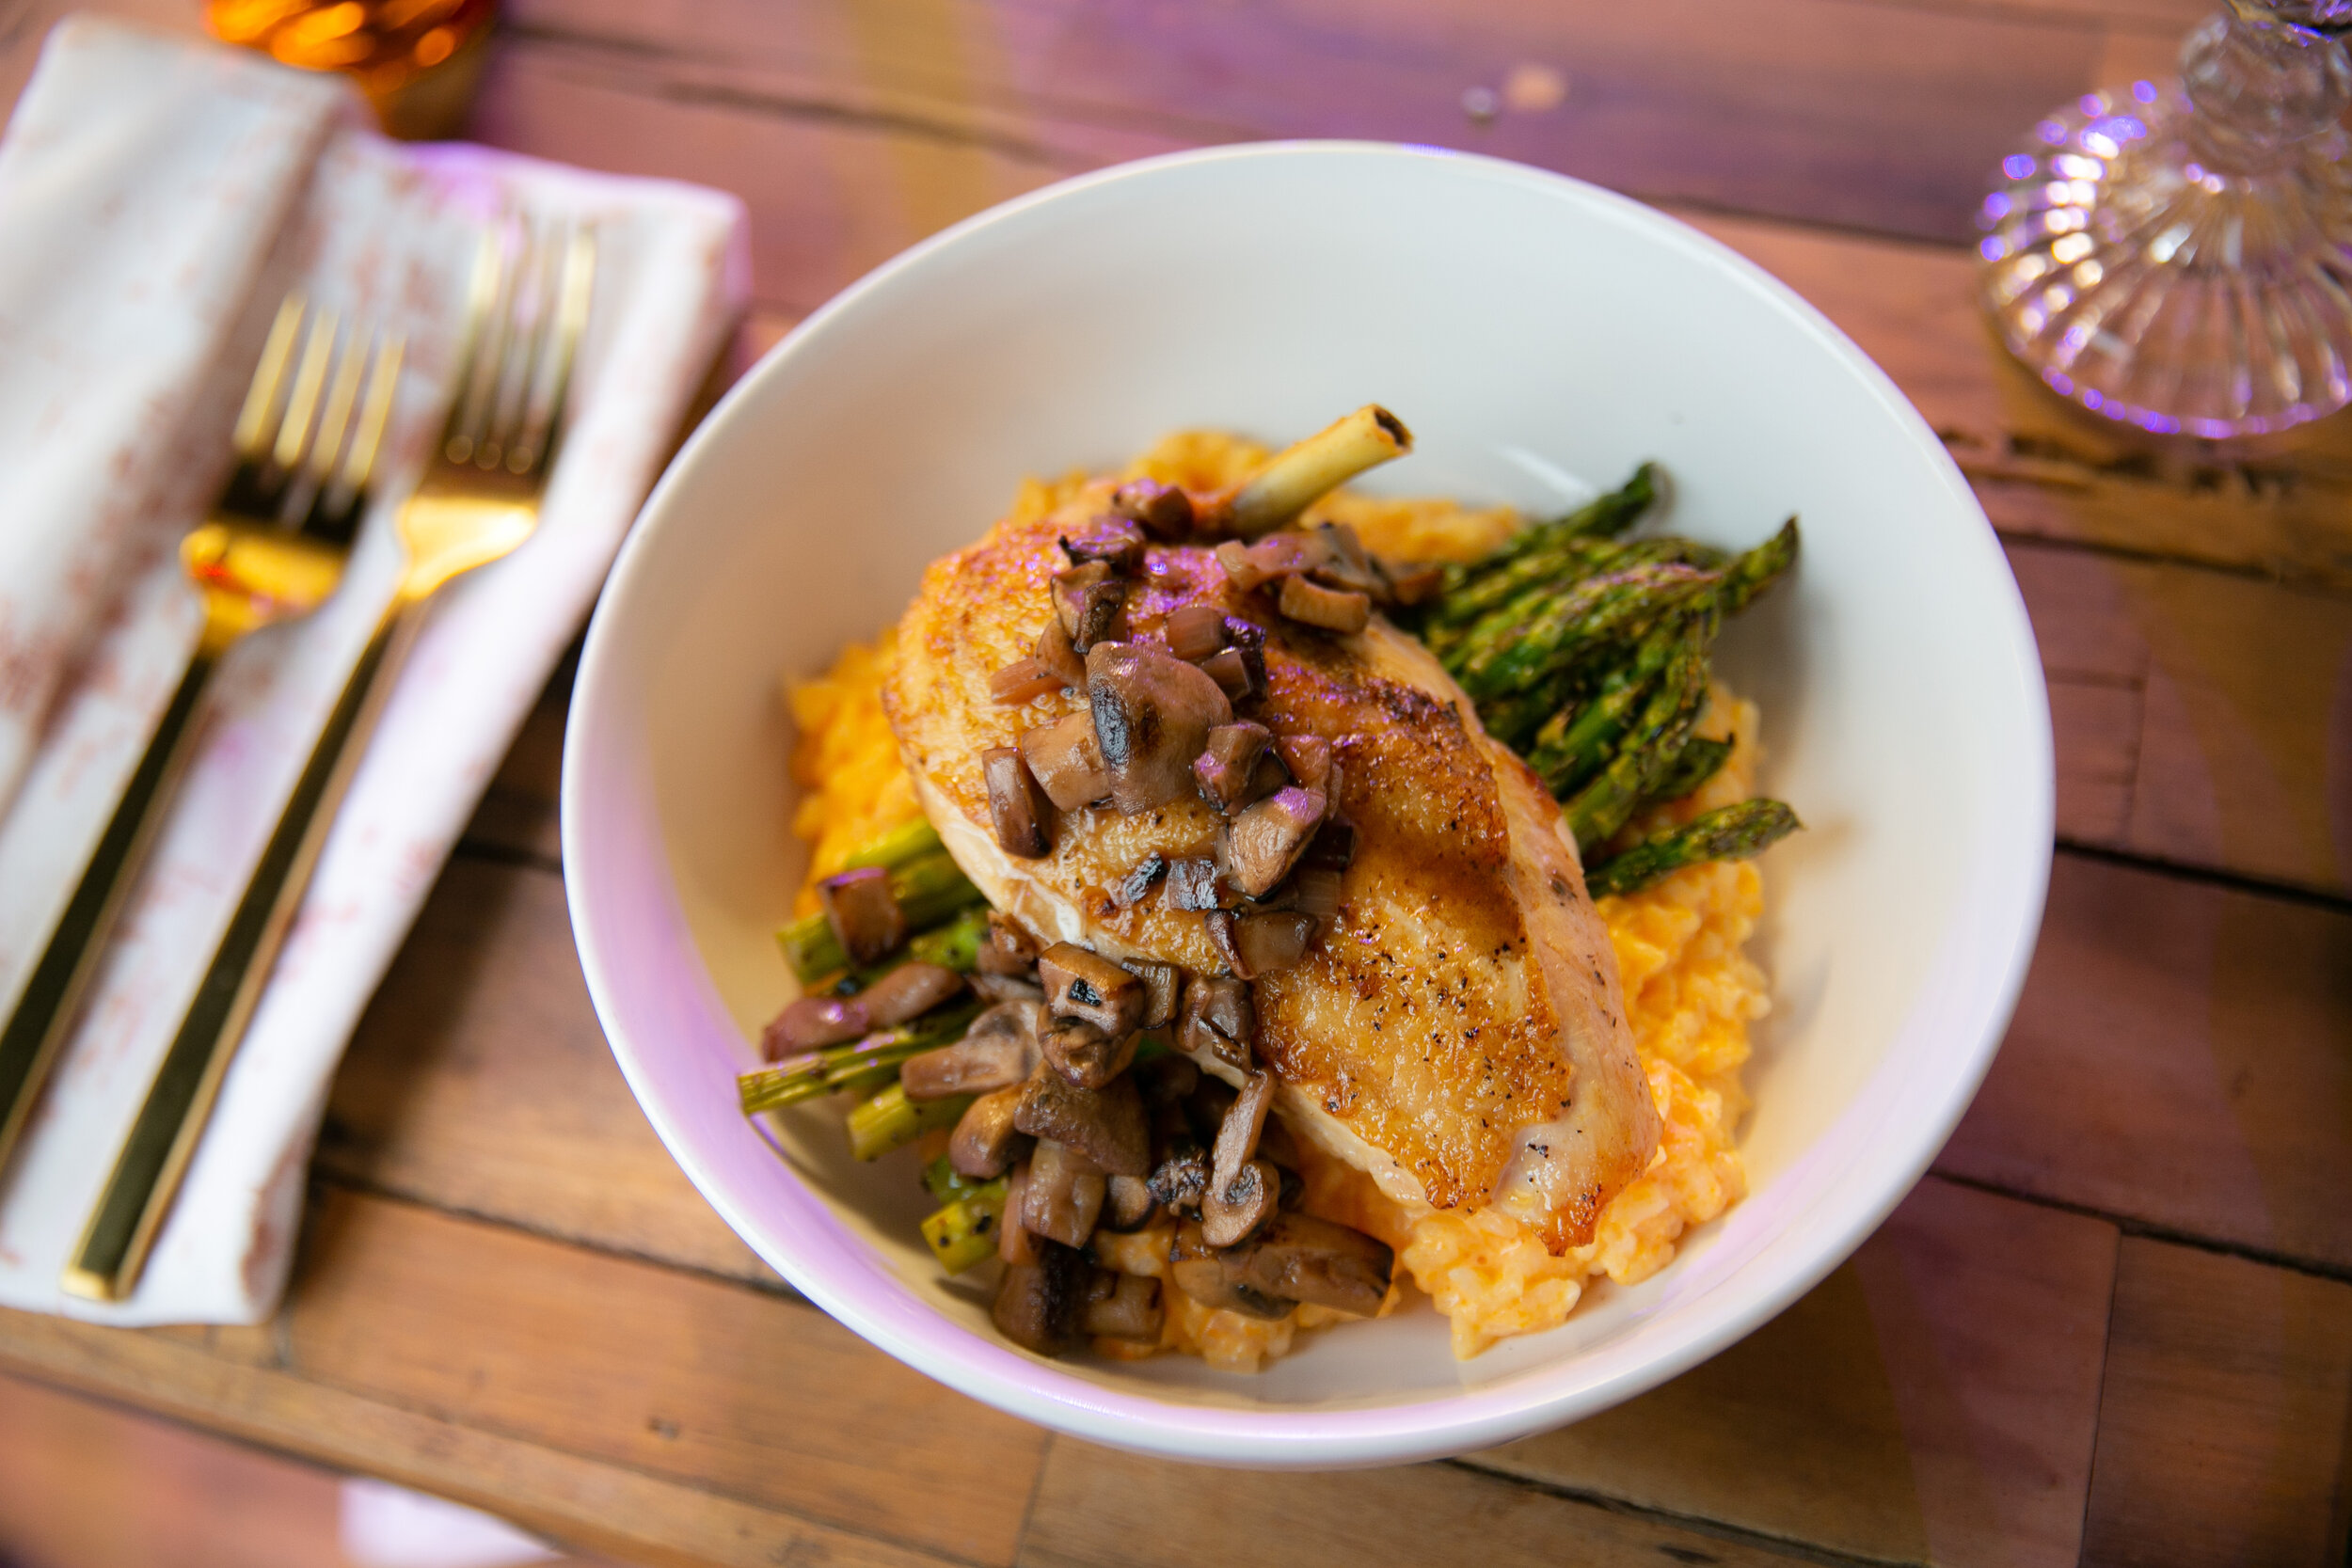 SAGE ROASTED CHICKEN MADERIA WINE SAUCE SHIITAKE MUSHROOMS OVER ASPARAGUS AND RICE